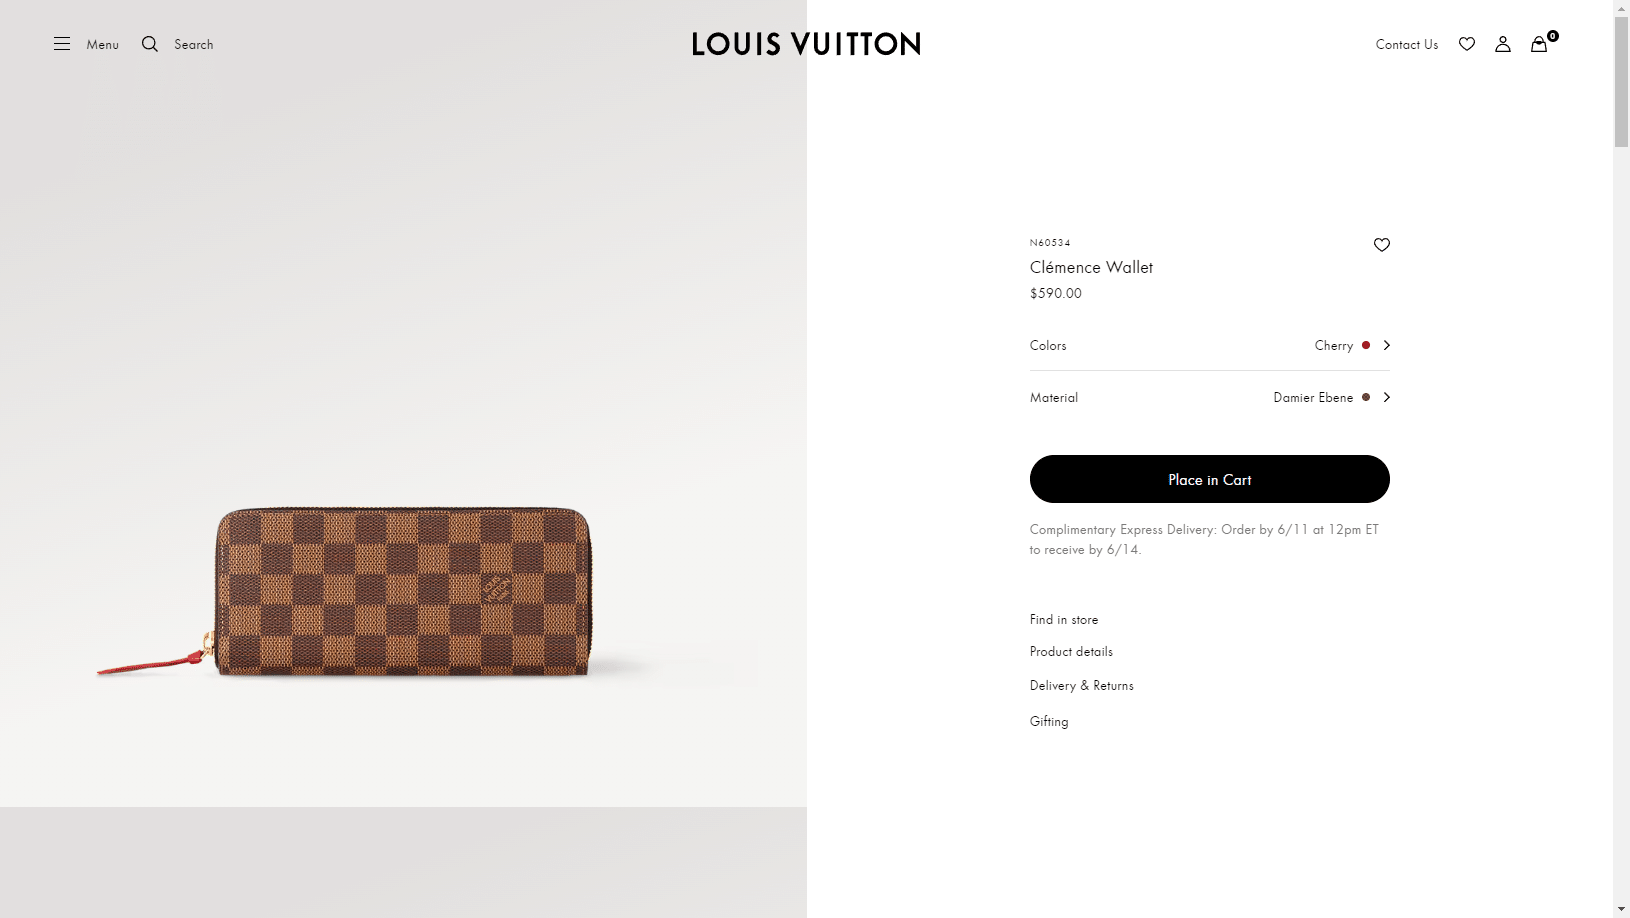 Clemence-Wallet-Damier-Ebene-Women-Small-Leather-Goods-LOUIS-VUITTON-.png